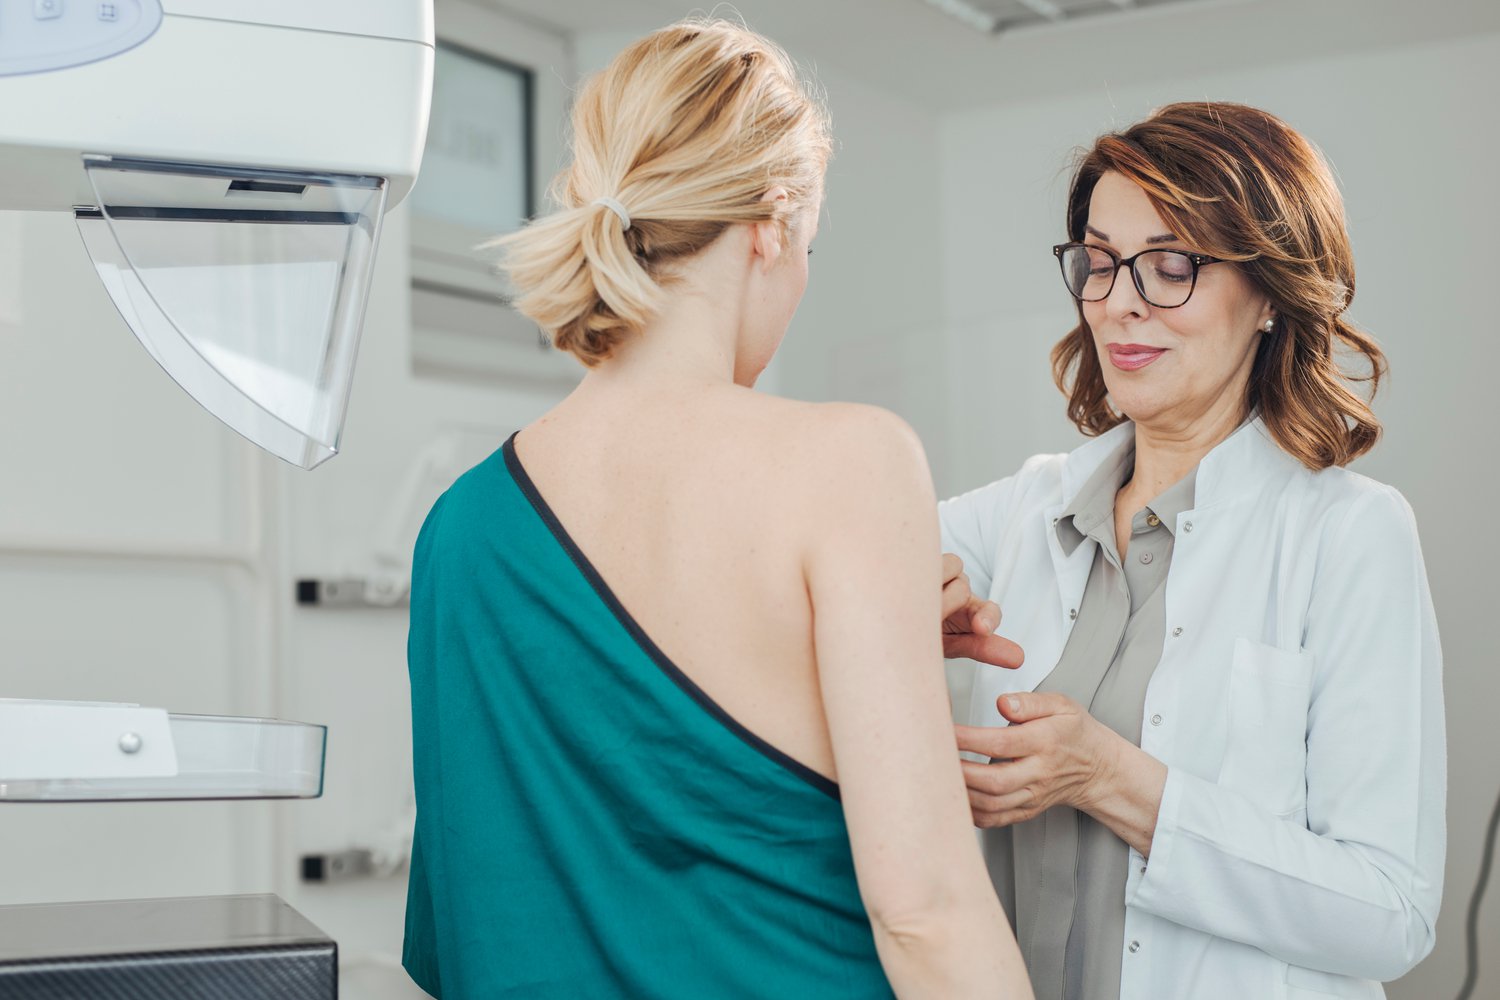 When to consult doctor breast changes